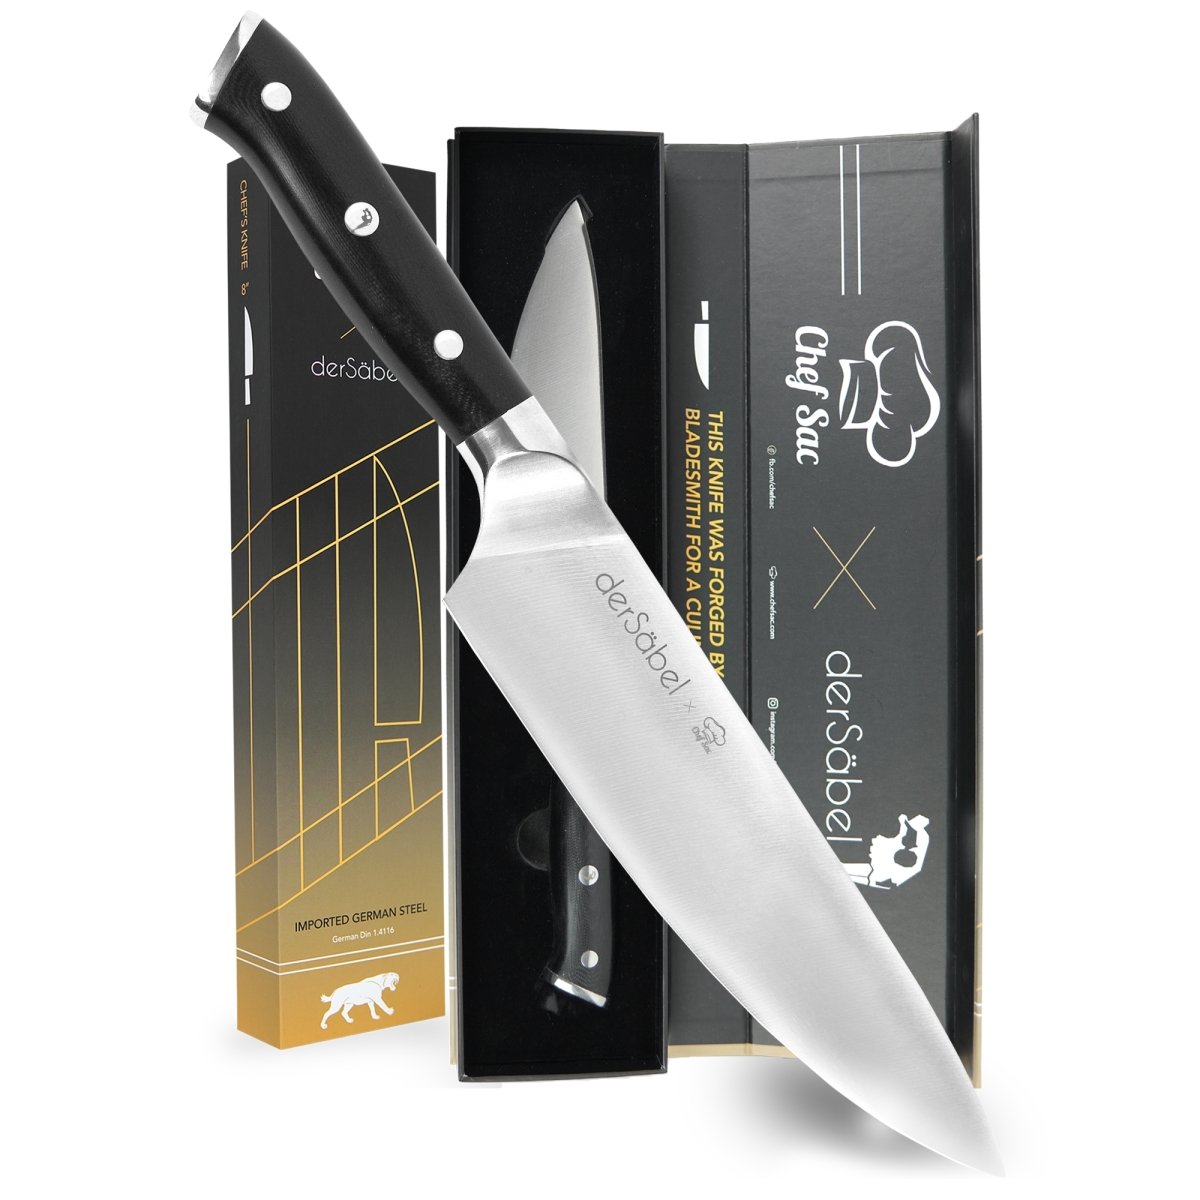 Cooks Standard High Carbon Stainless Steel Knife Set 2-Piece, 8